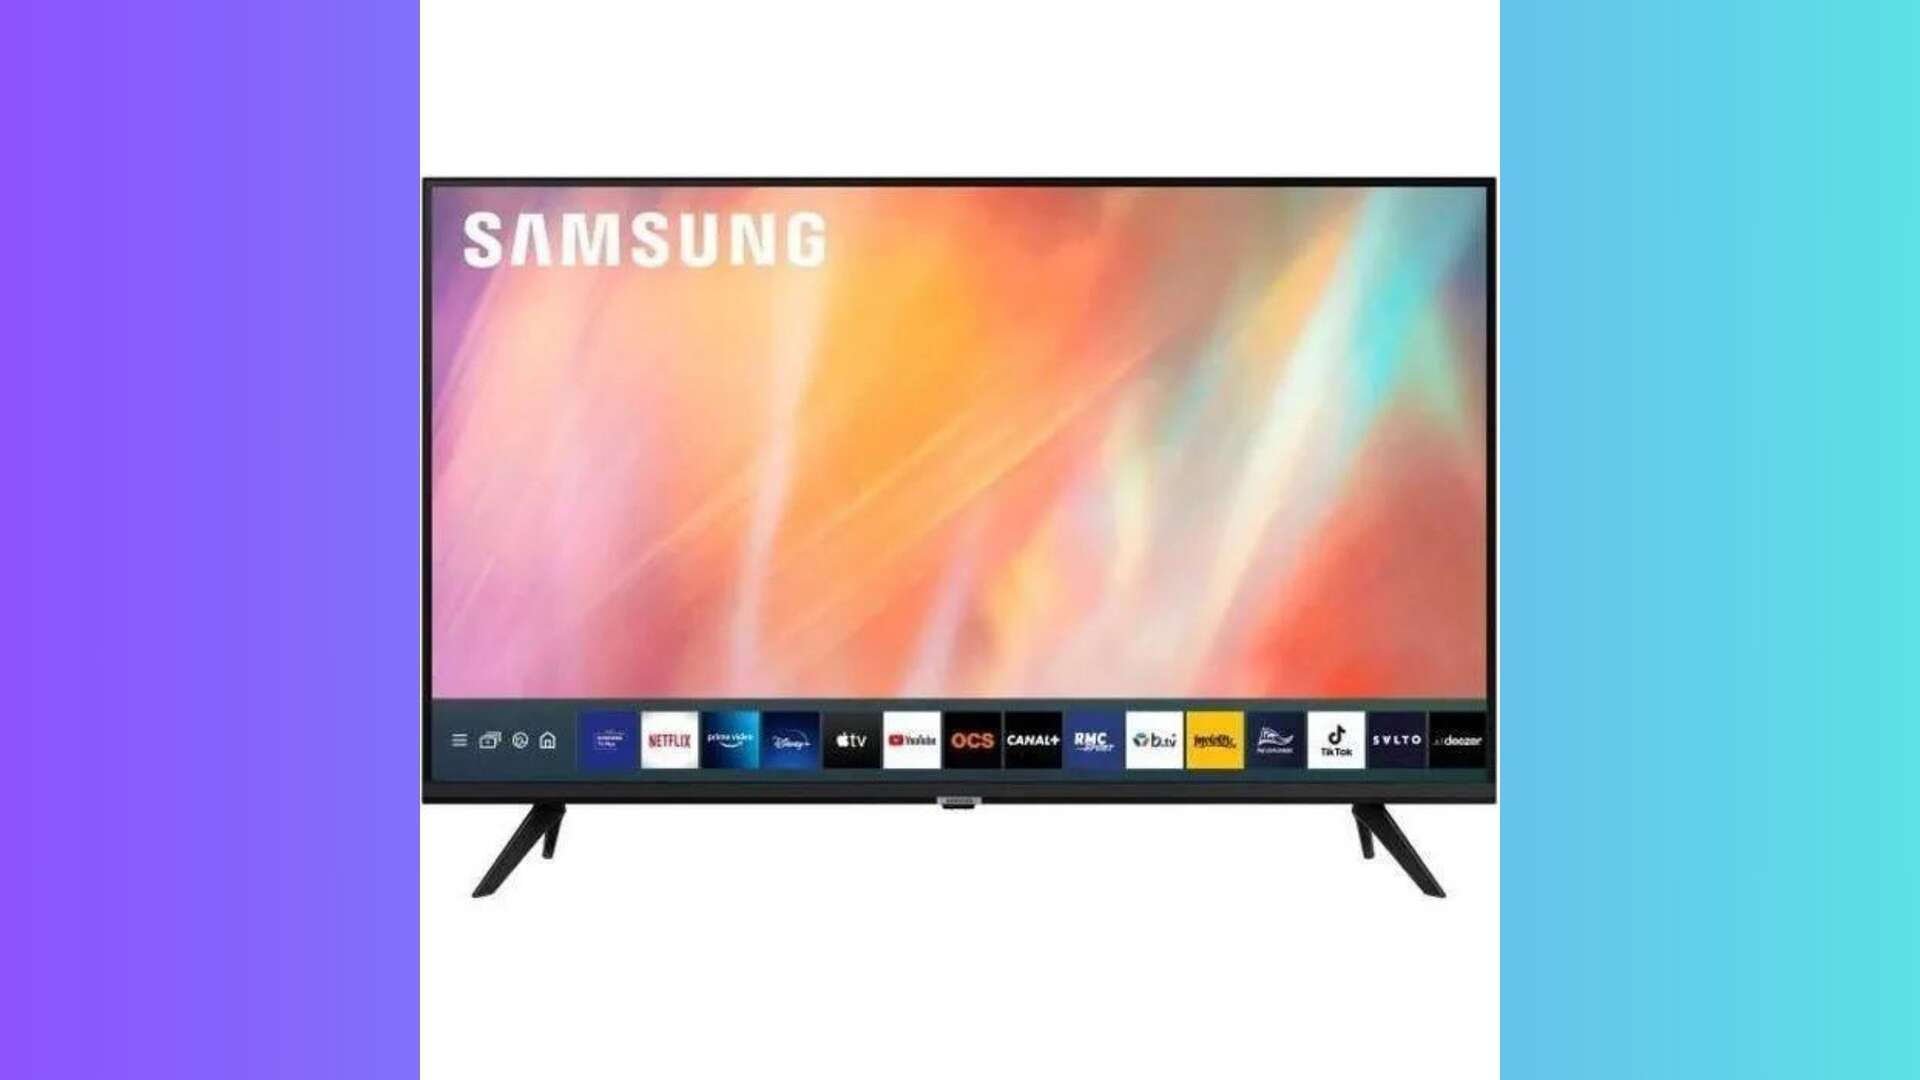 incredible promotion on this unique Smart TV on the market!